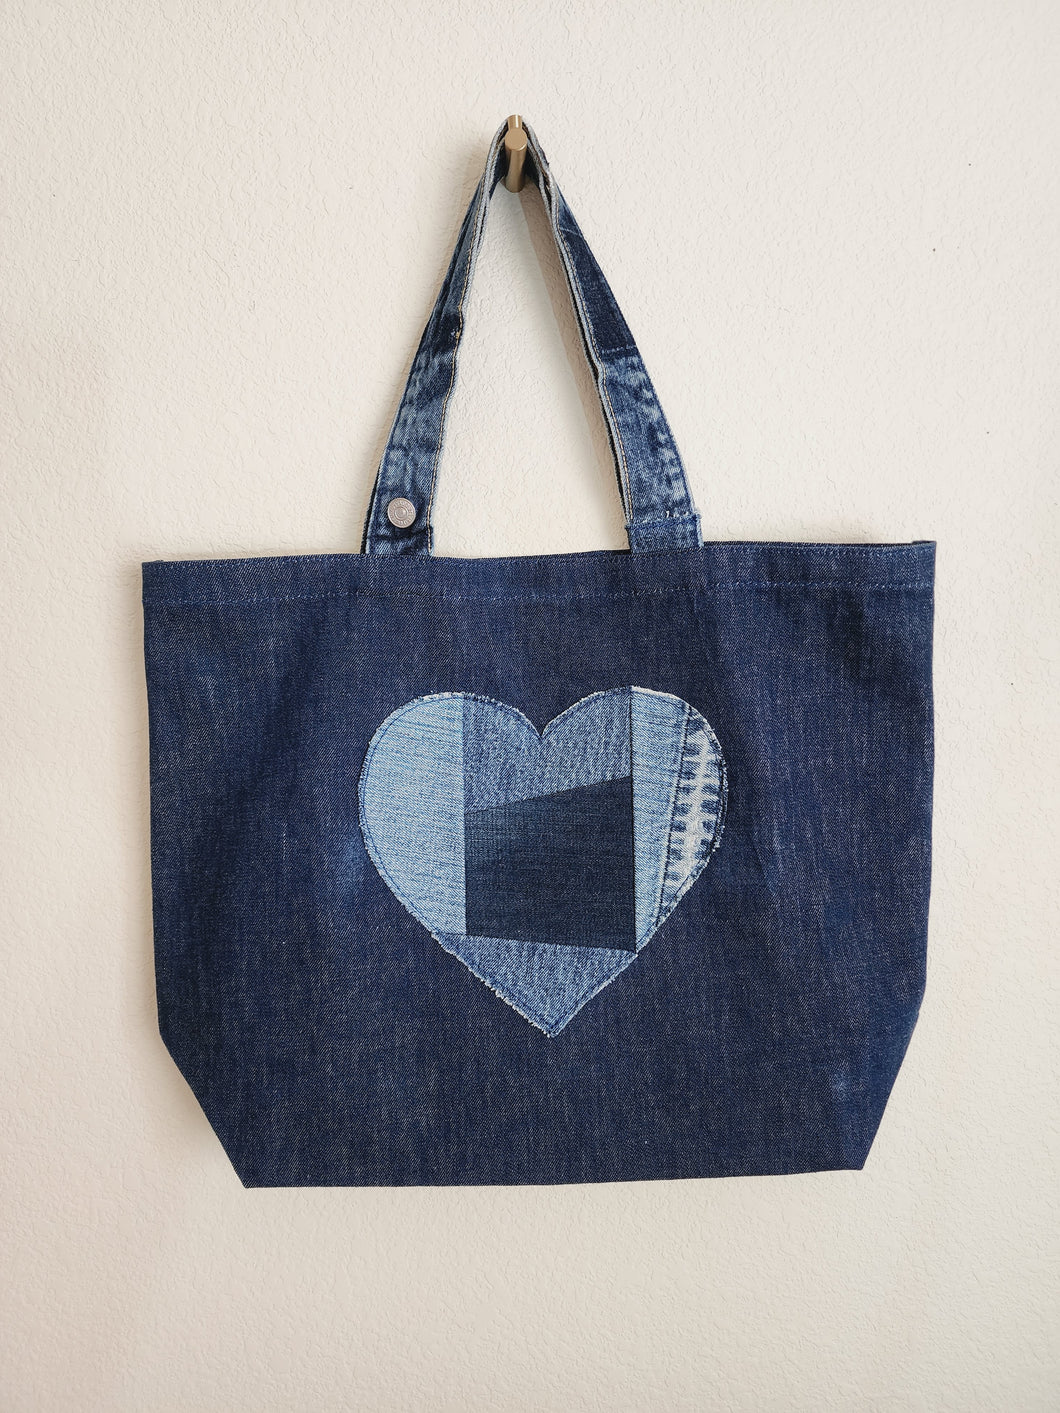 Deep blue denim tote bag with repurposed waistband as handle. The design of bag is m inimalistic wit h a decorative heart sewn in four shades blue of patchwork style.